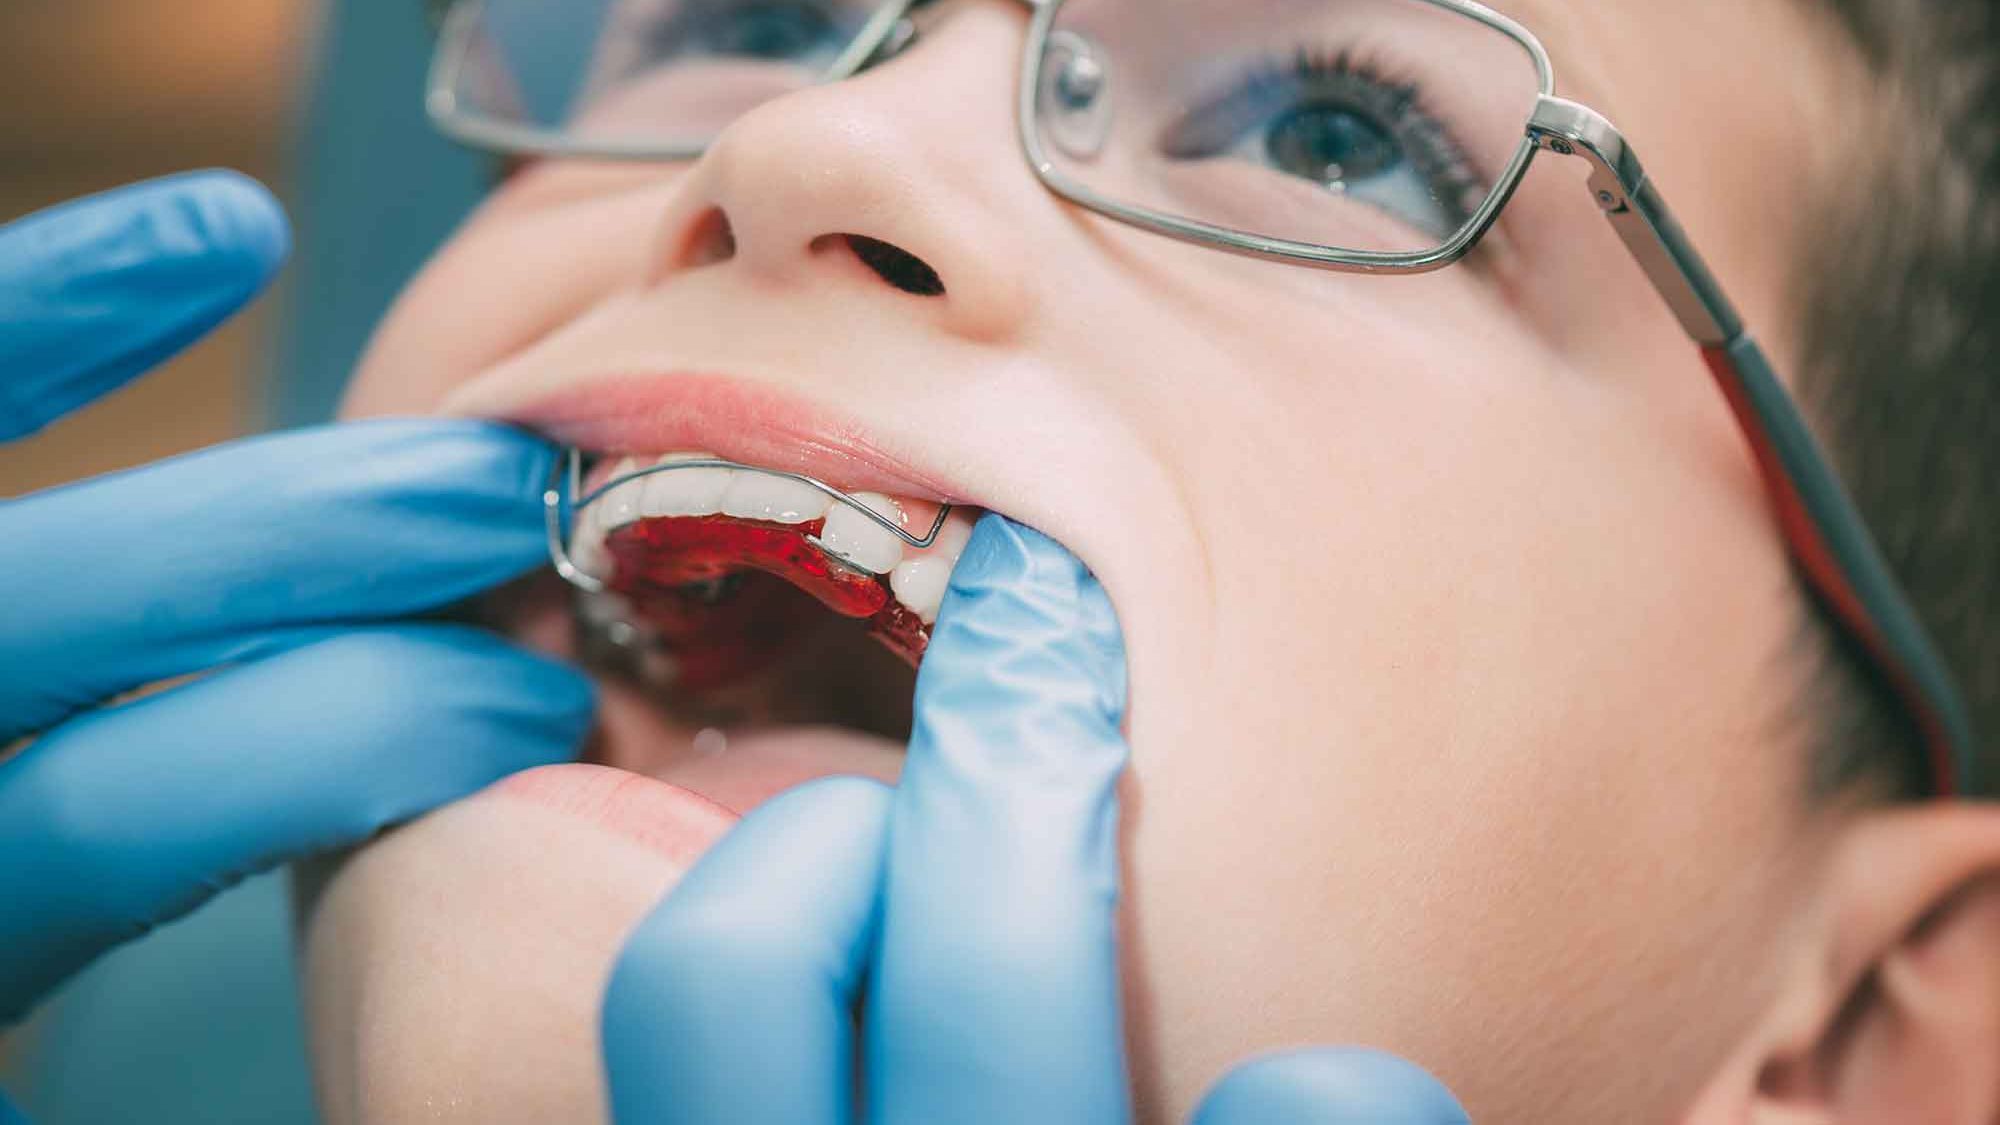 Tendering process for NHS orthodontics is creating a 'race to the bottom', BDA claims